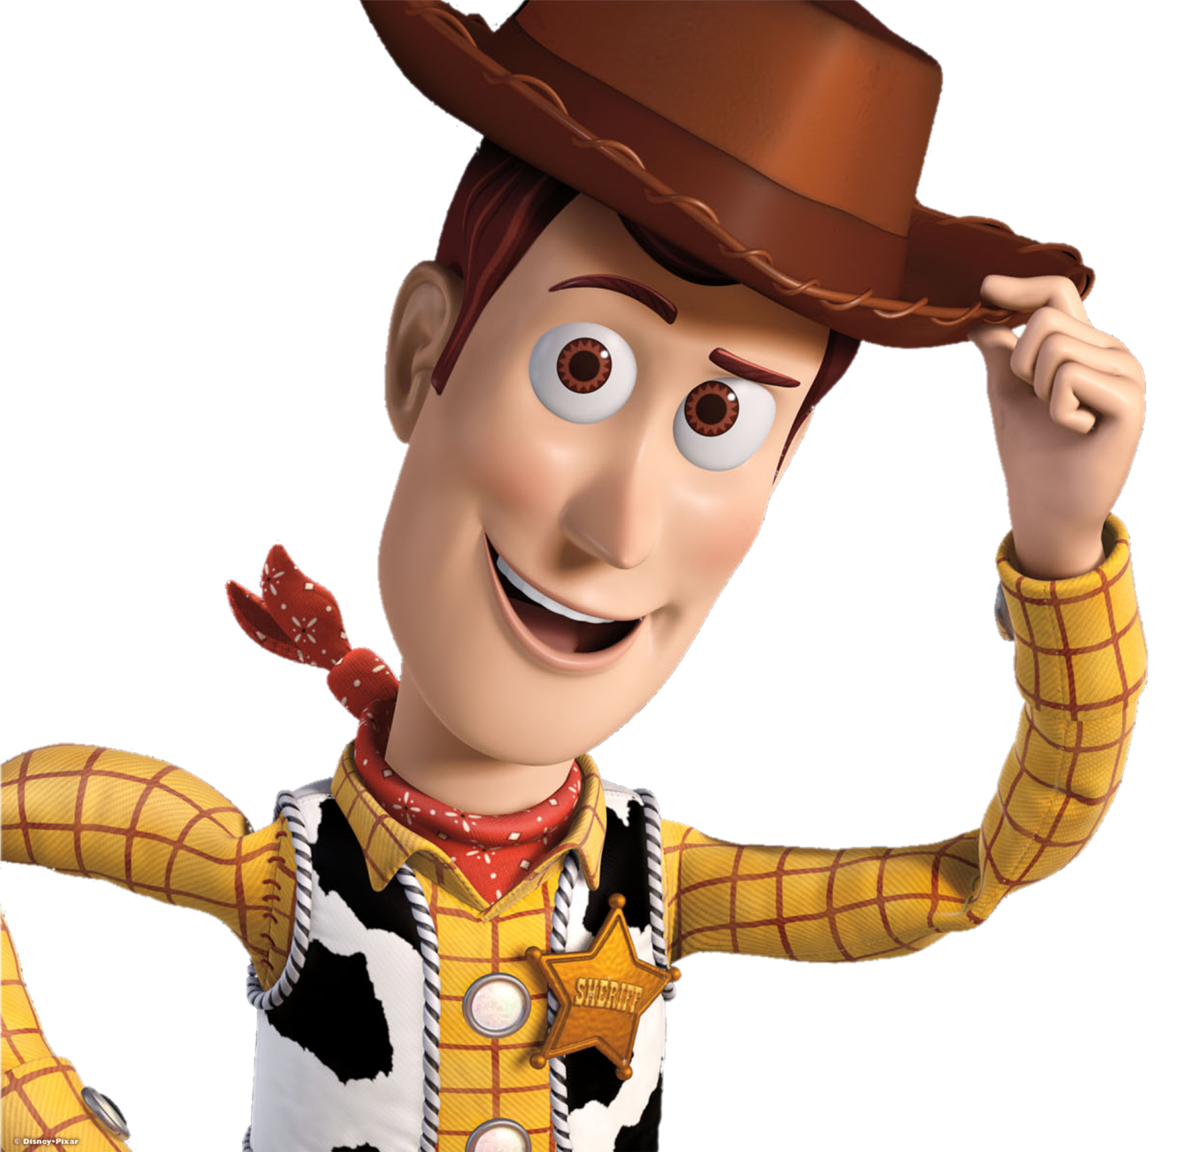 Woody Toy Story No Hat Toy Story 2 Woody Finding His Hat Jay Z